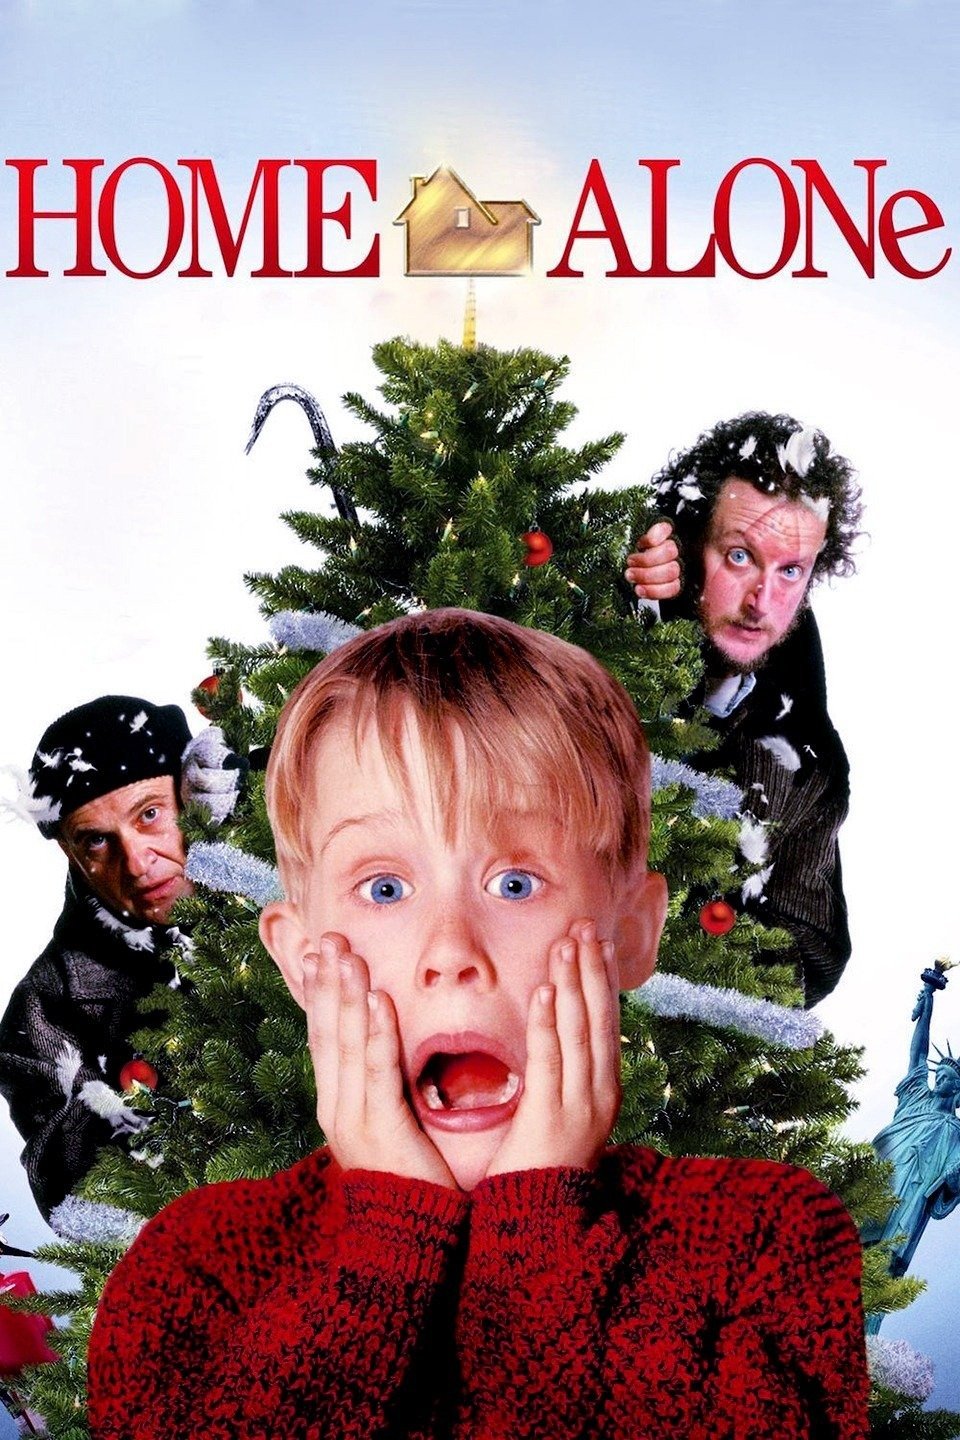 Home Alone movie poster with Kevin slapping his hands to his cheeks and the robbers peeking out from behind a christmas tree in the background